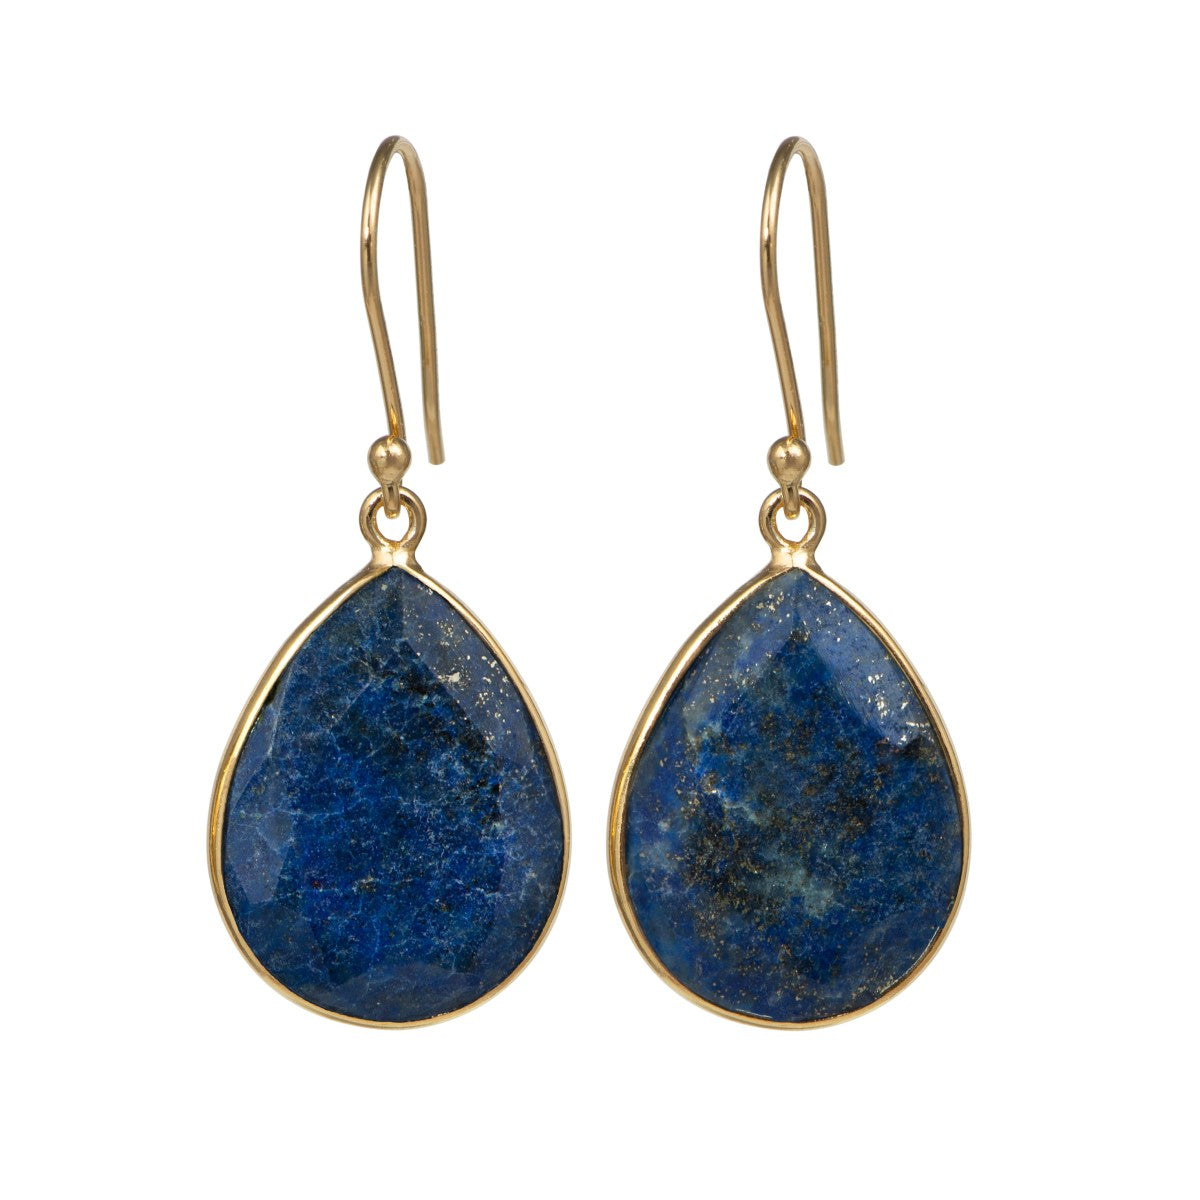 Lapis Lazuli Gold Plated Sterling Silver Earrings with a Tear Drop Shaped Gemstone